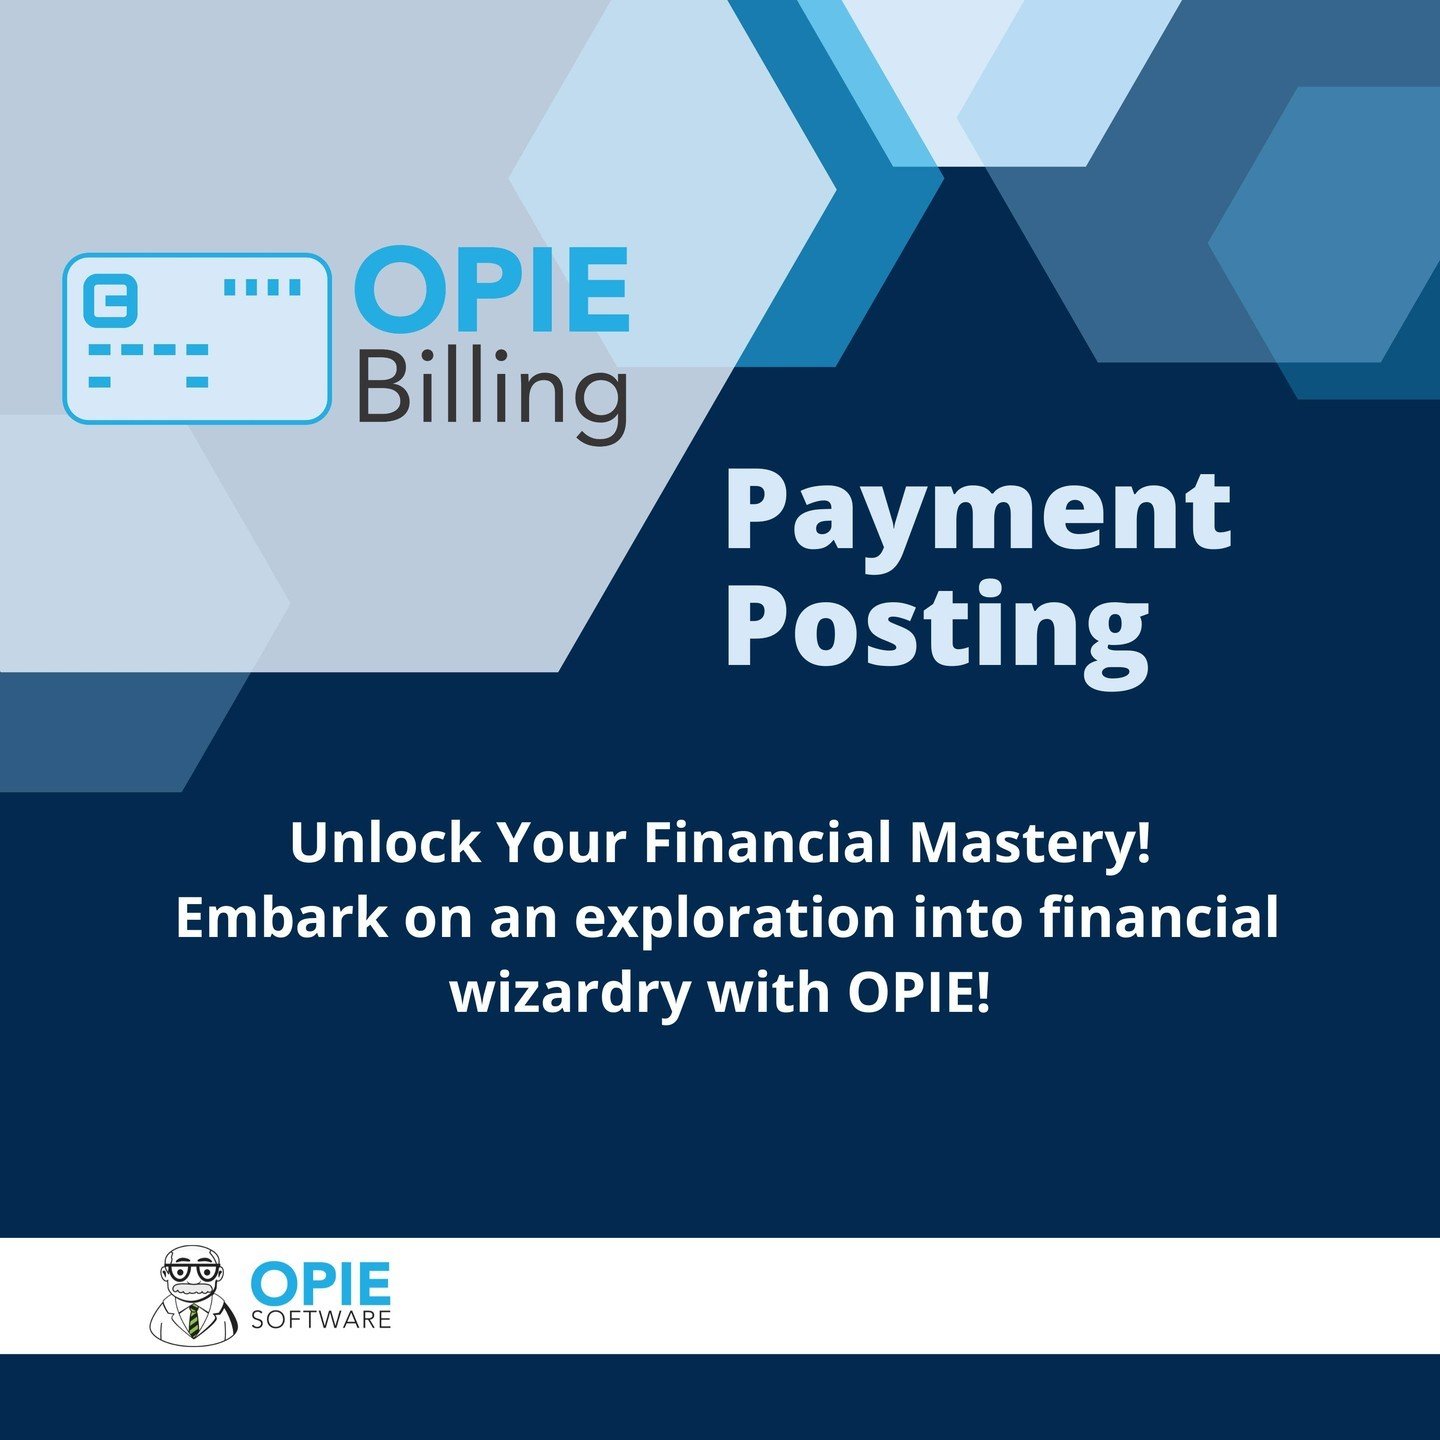 Unlock Your Financial Mastery with OPIE! 💰
Embark on an exploration into financial wizardry with OPIE! 💼
Join us this afternoon as we delve into the intricacies of:
💡 Manual Posting: Full control of your finances.
🚀 Auto Posting: Free up your tim